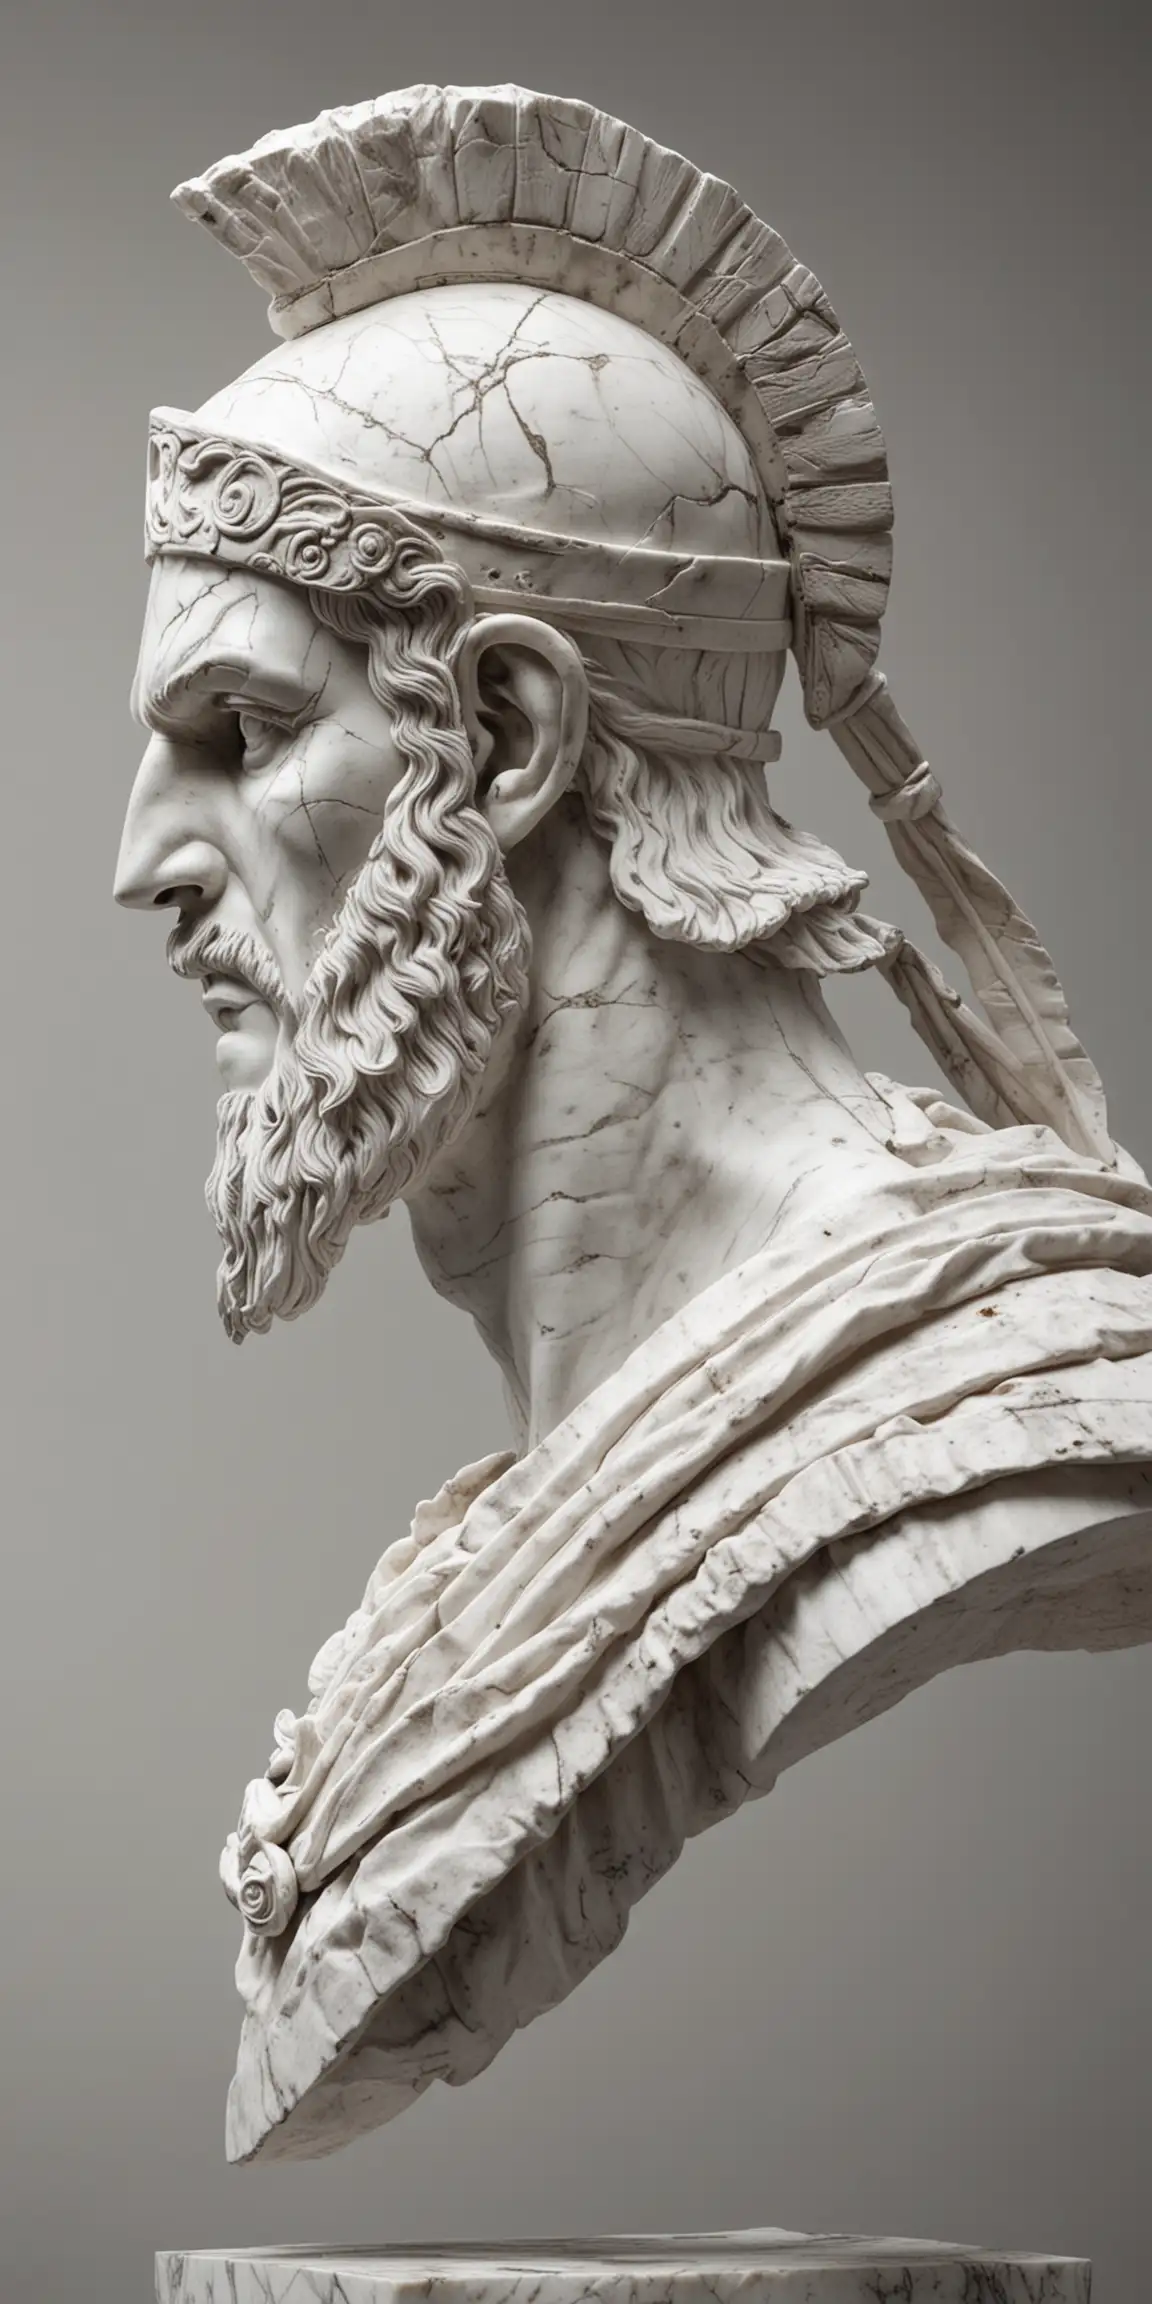 create a white marble statue of a Greek warrior,  we see his profile, he is wearing a spartan mask, the light comes from above,  the background is plain white